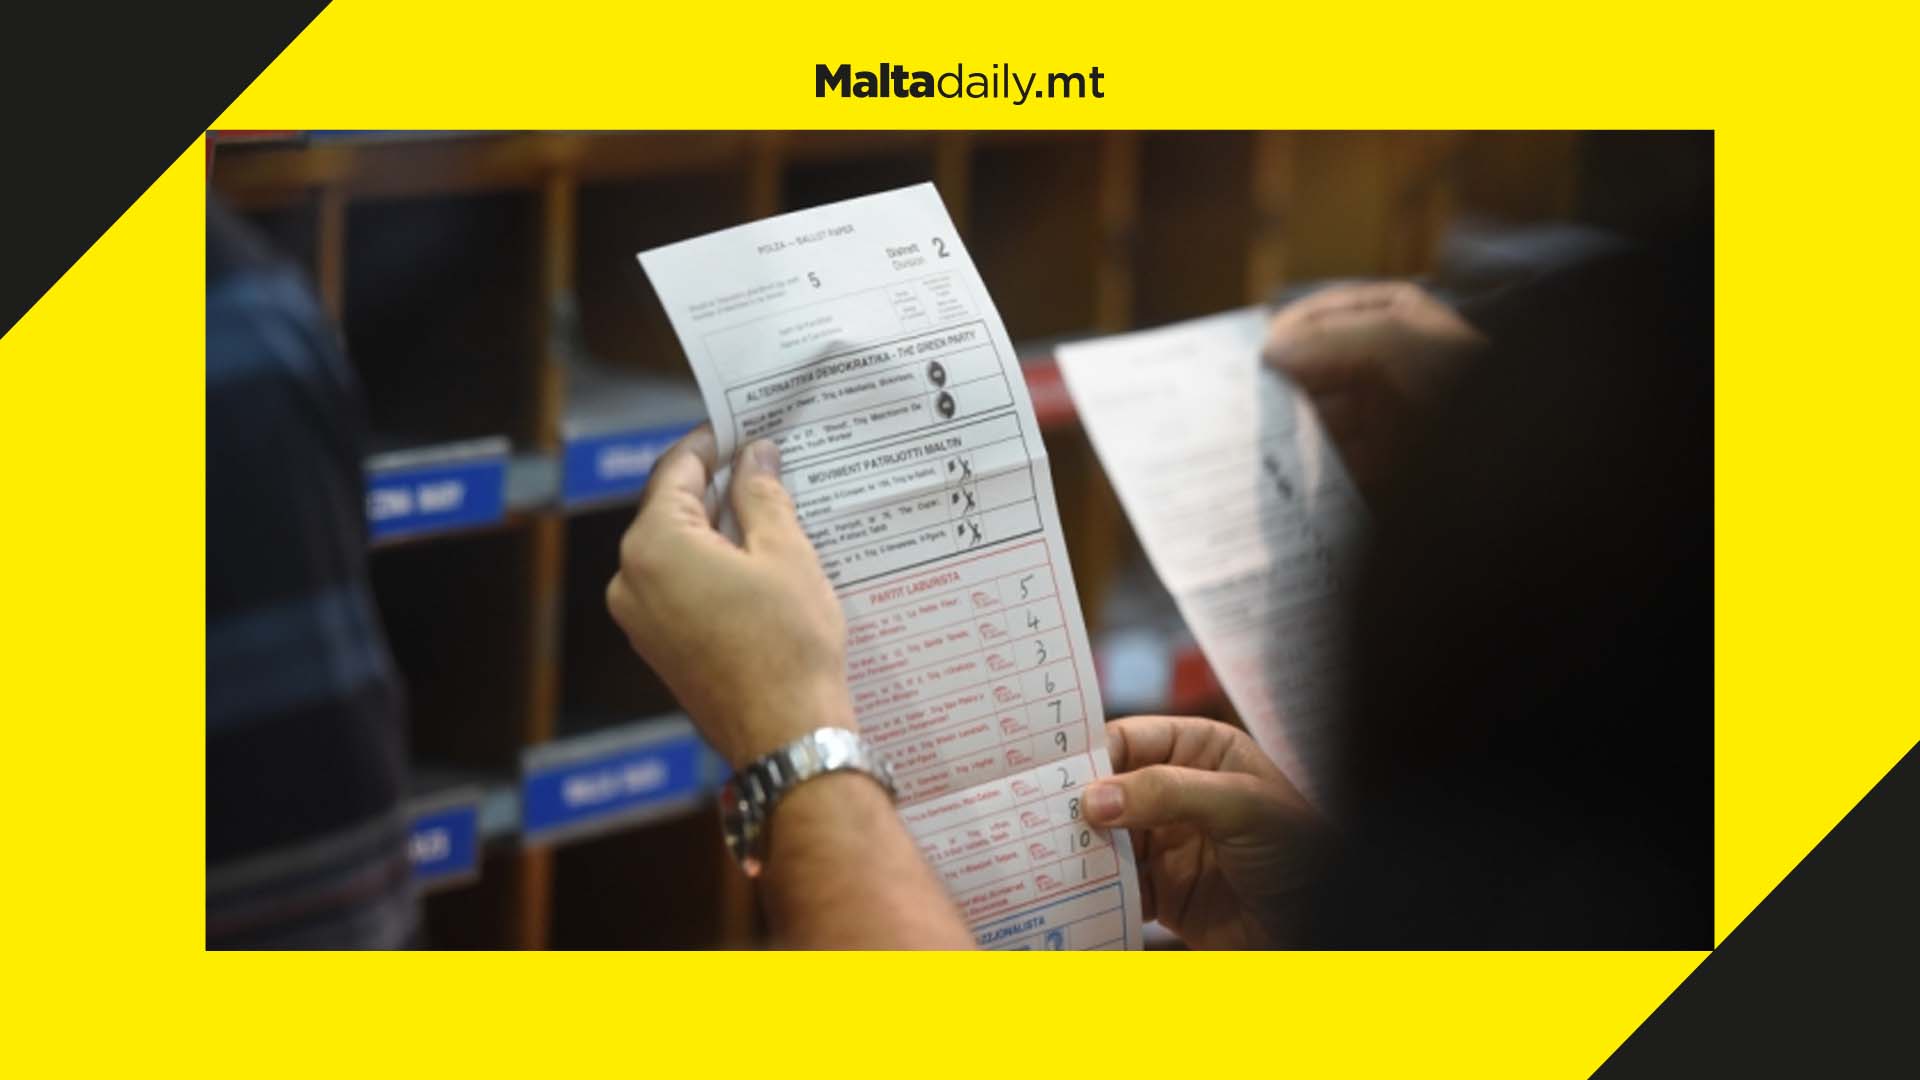 Votes can be picked up from Naxxar or Rabat, Ghawdex today